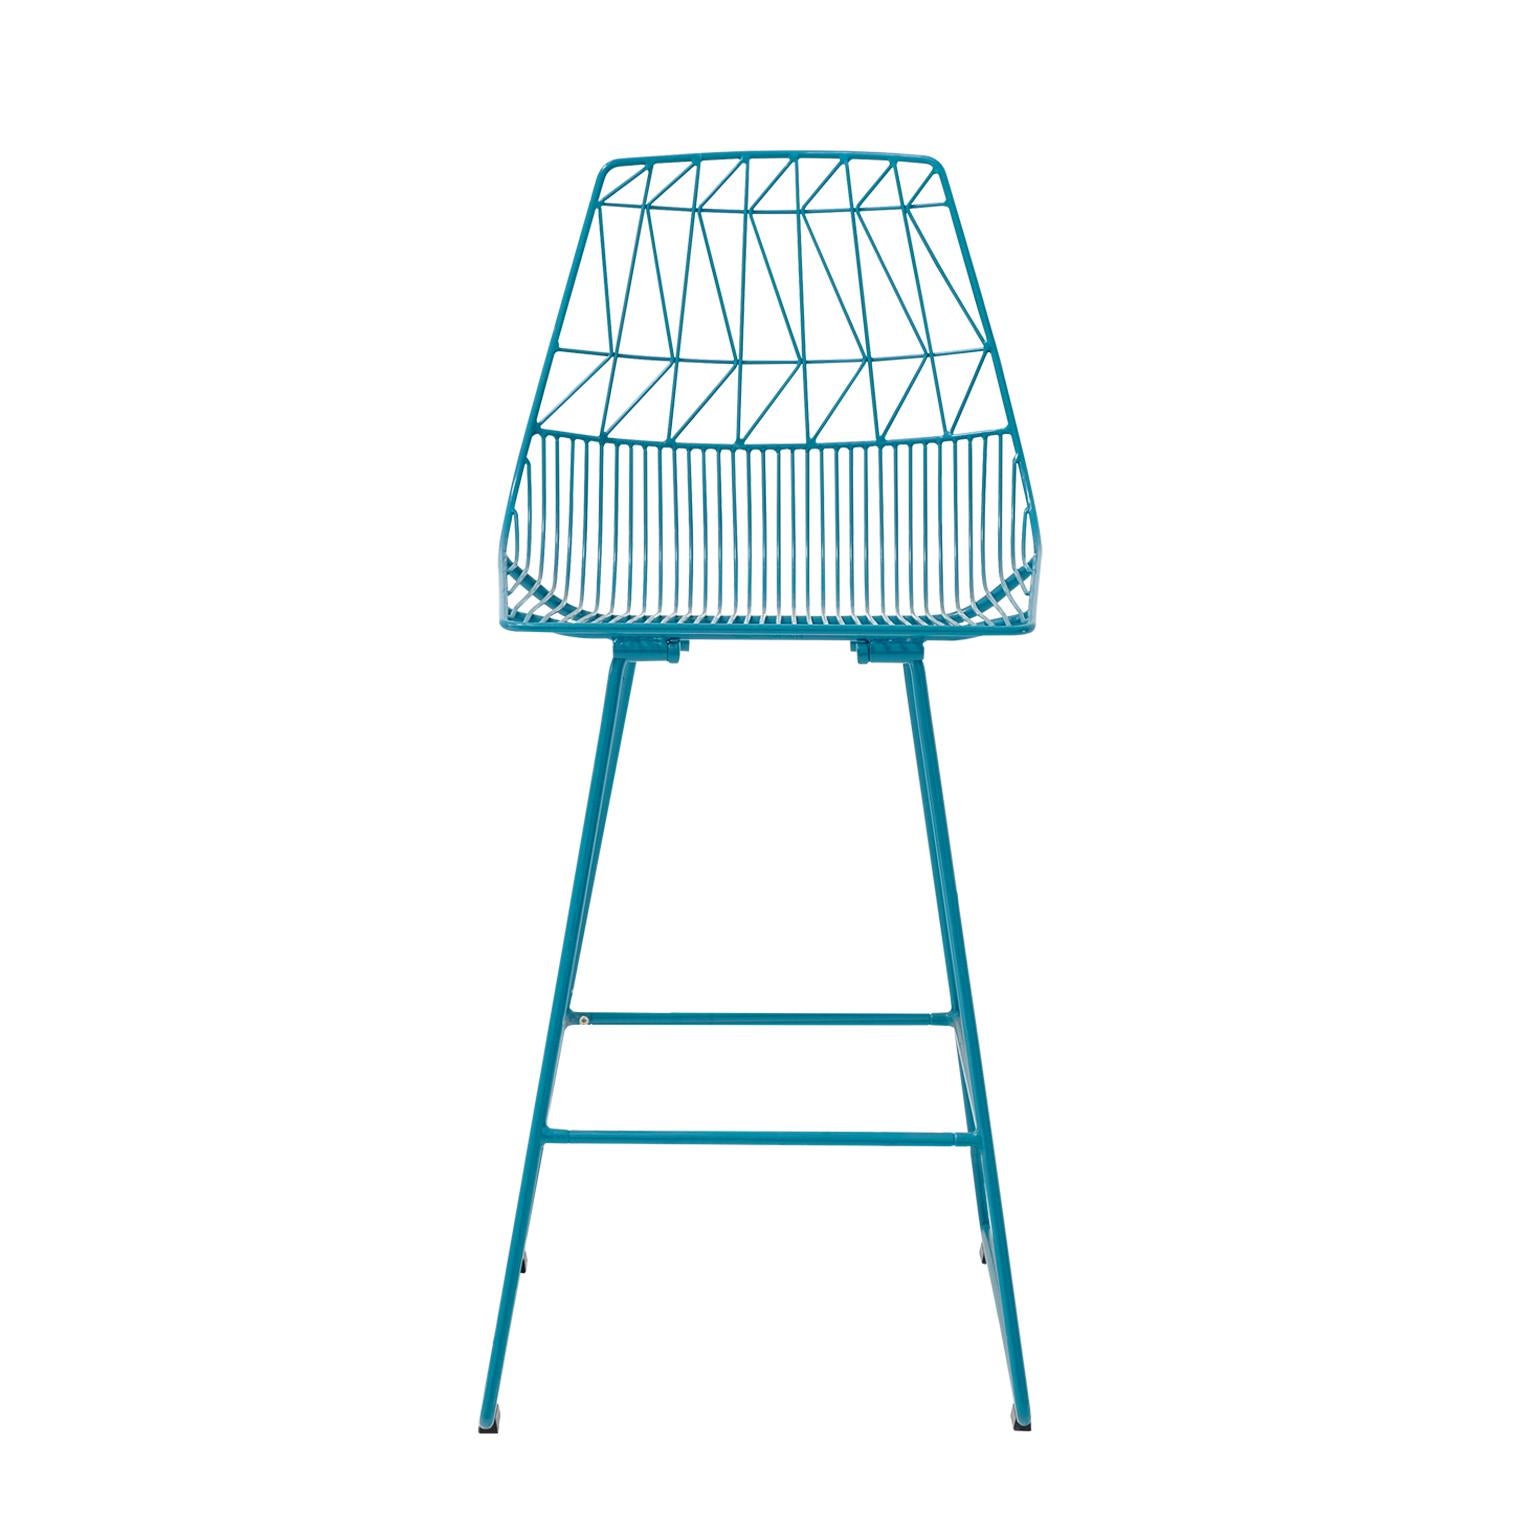 Bend Goods Furniture
The Lucy counter stool can be found in commercial projects around the world, from Los Angeles to Paris. With the contemporary wire design of Bend Goods' signature Lucy chair and a variety of durable and customizable finishes,